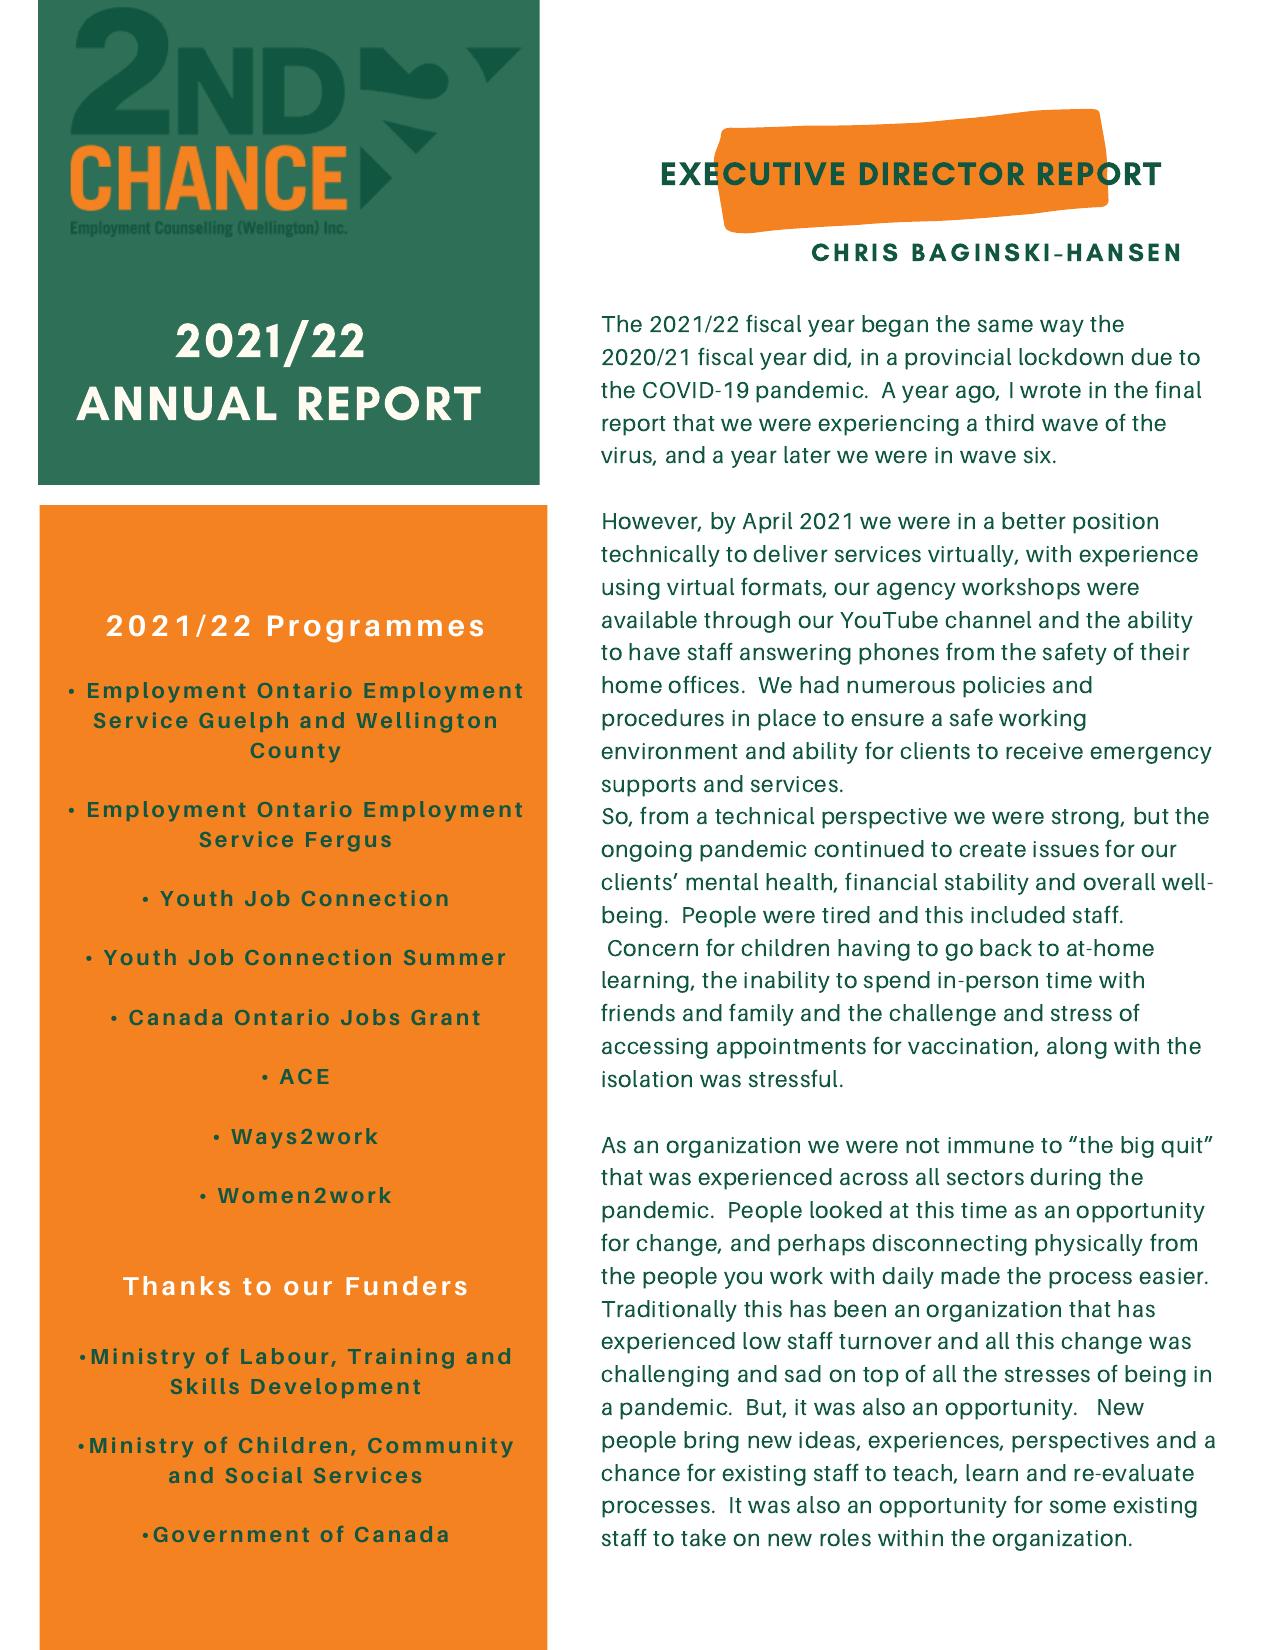 2NDCHANCE 2022 Annual Report